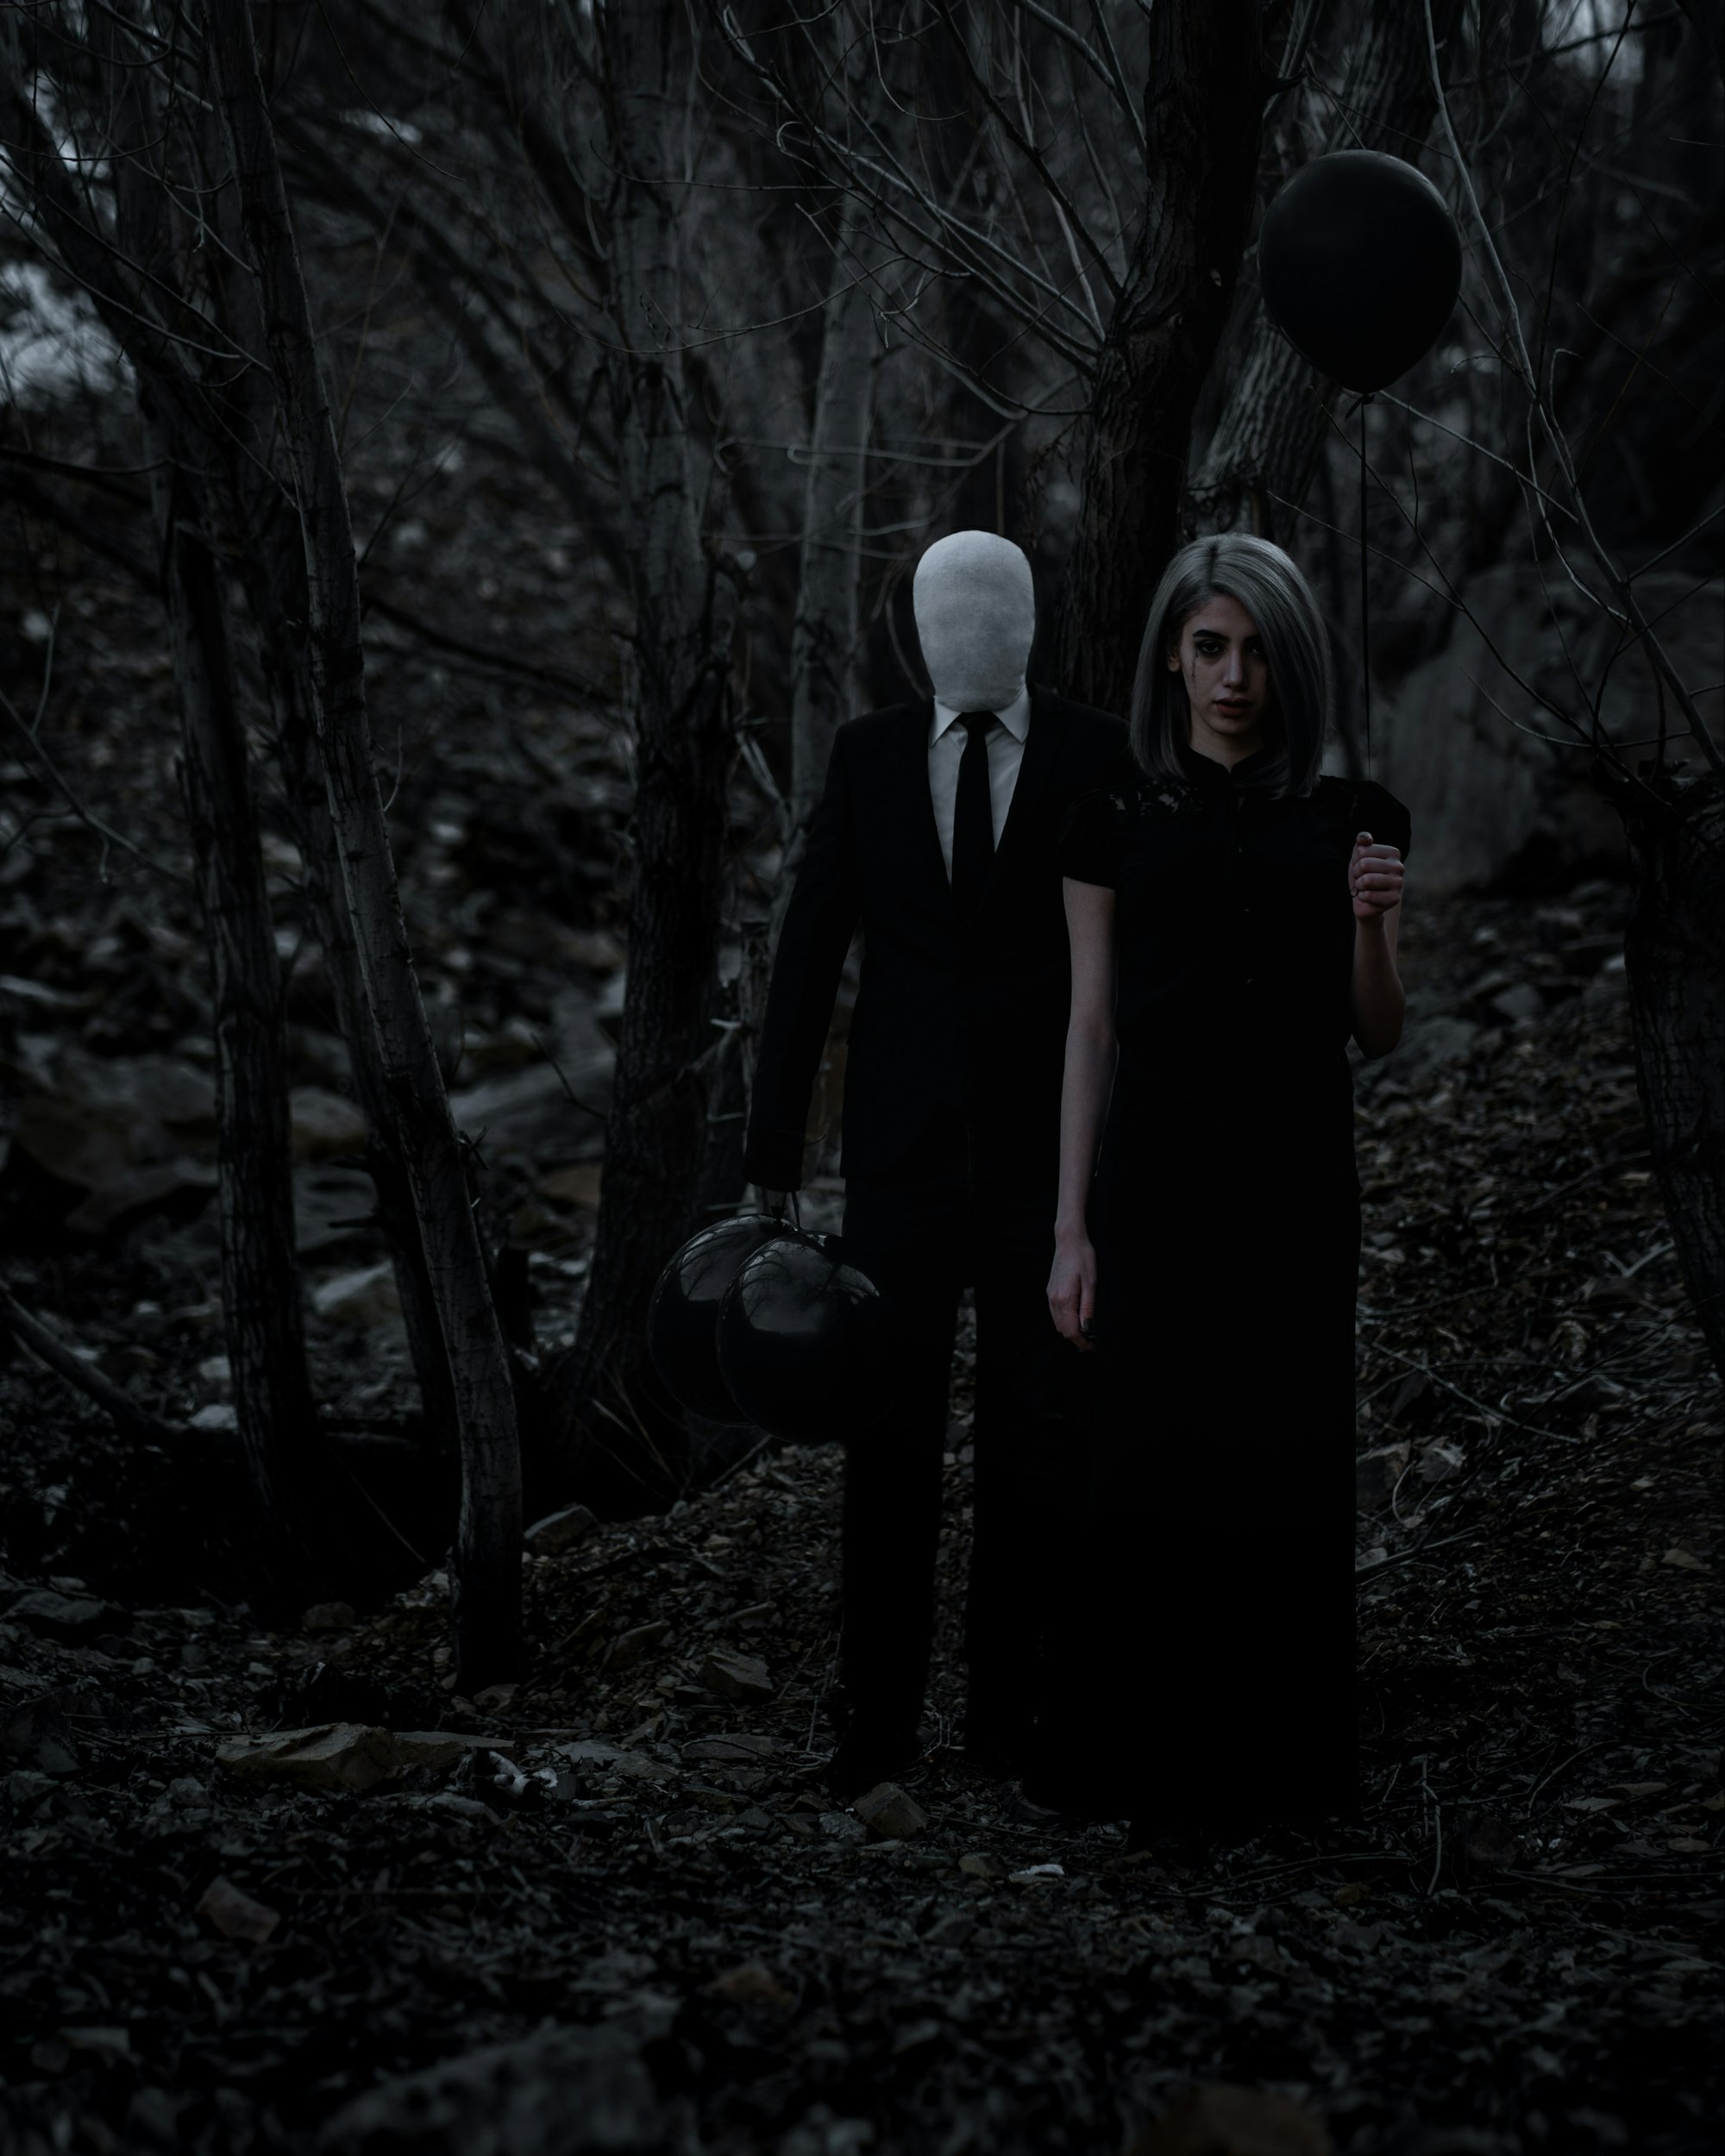 Web3 Is Trying to Save The CreepyPasta, Slender Man